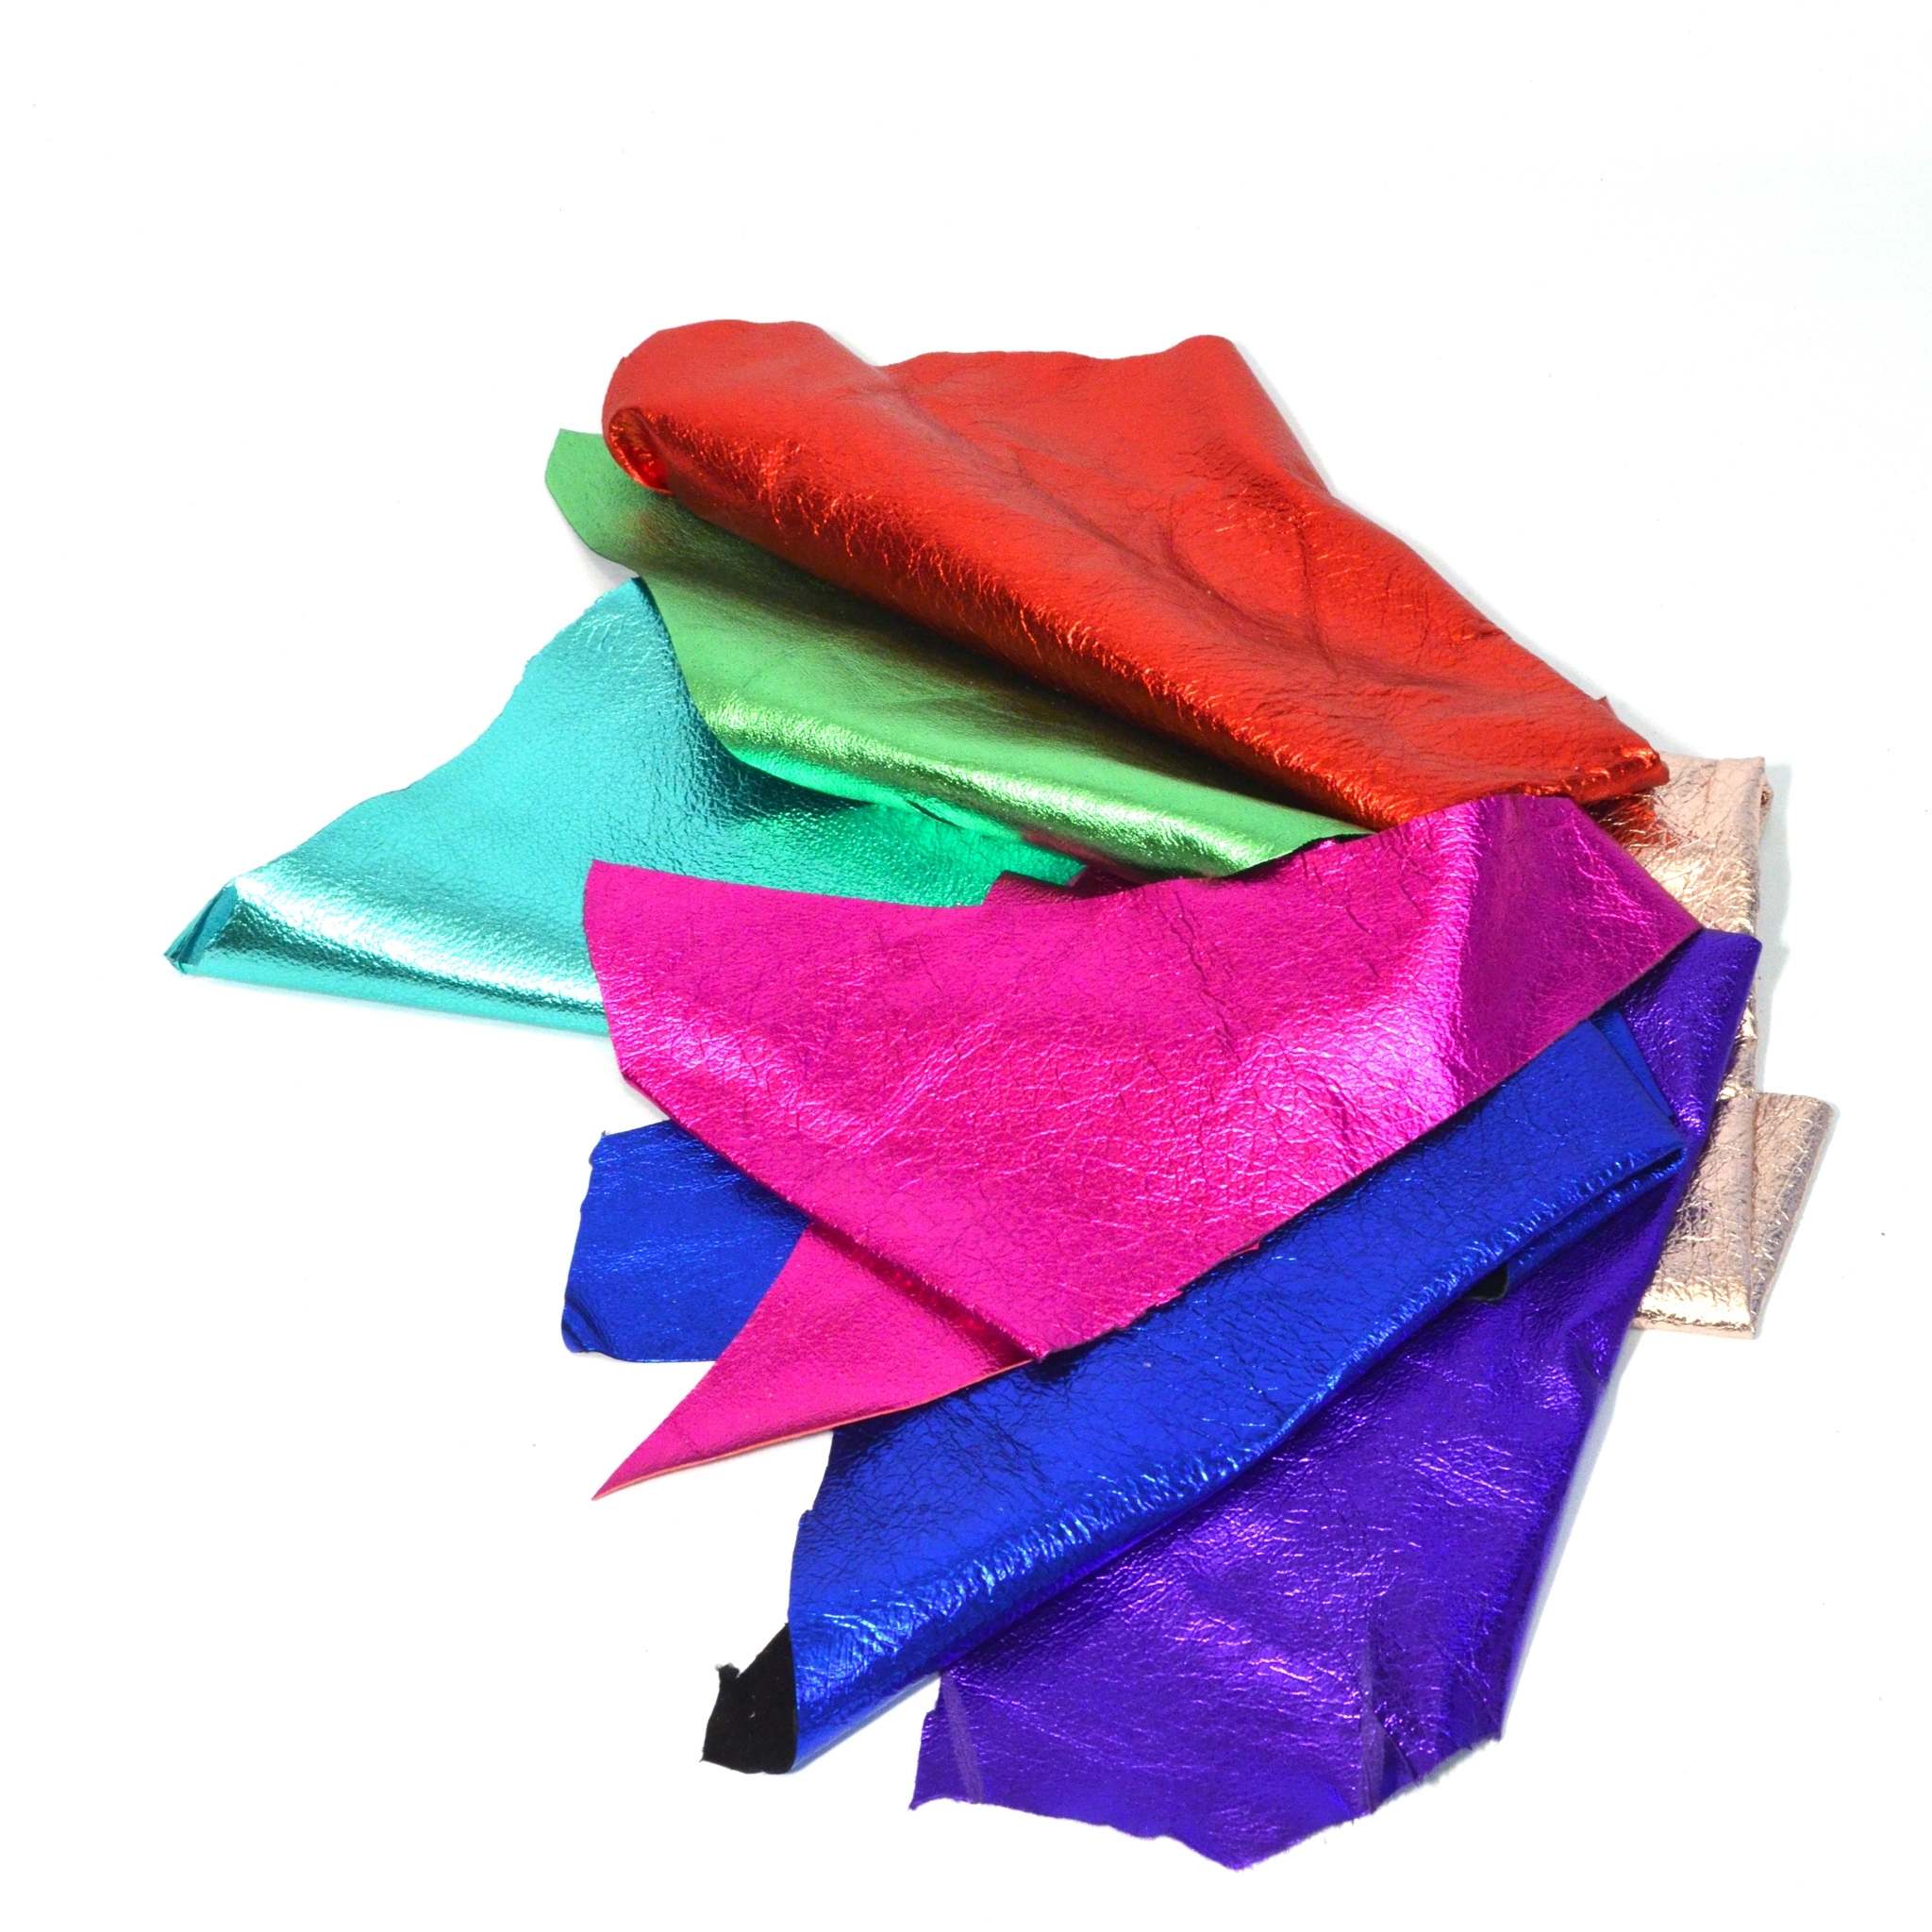 250g bag of coloured metallic leather pieces ideal for craft, applique 